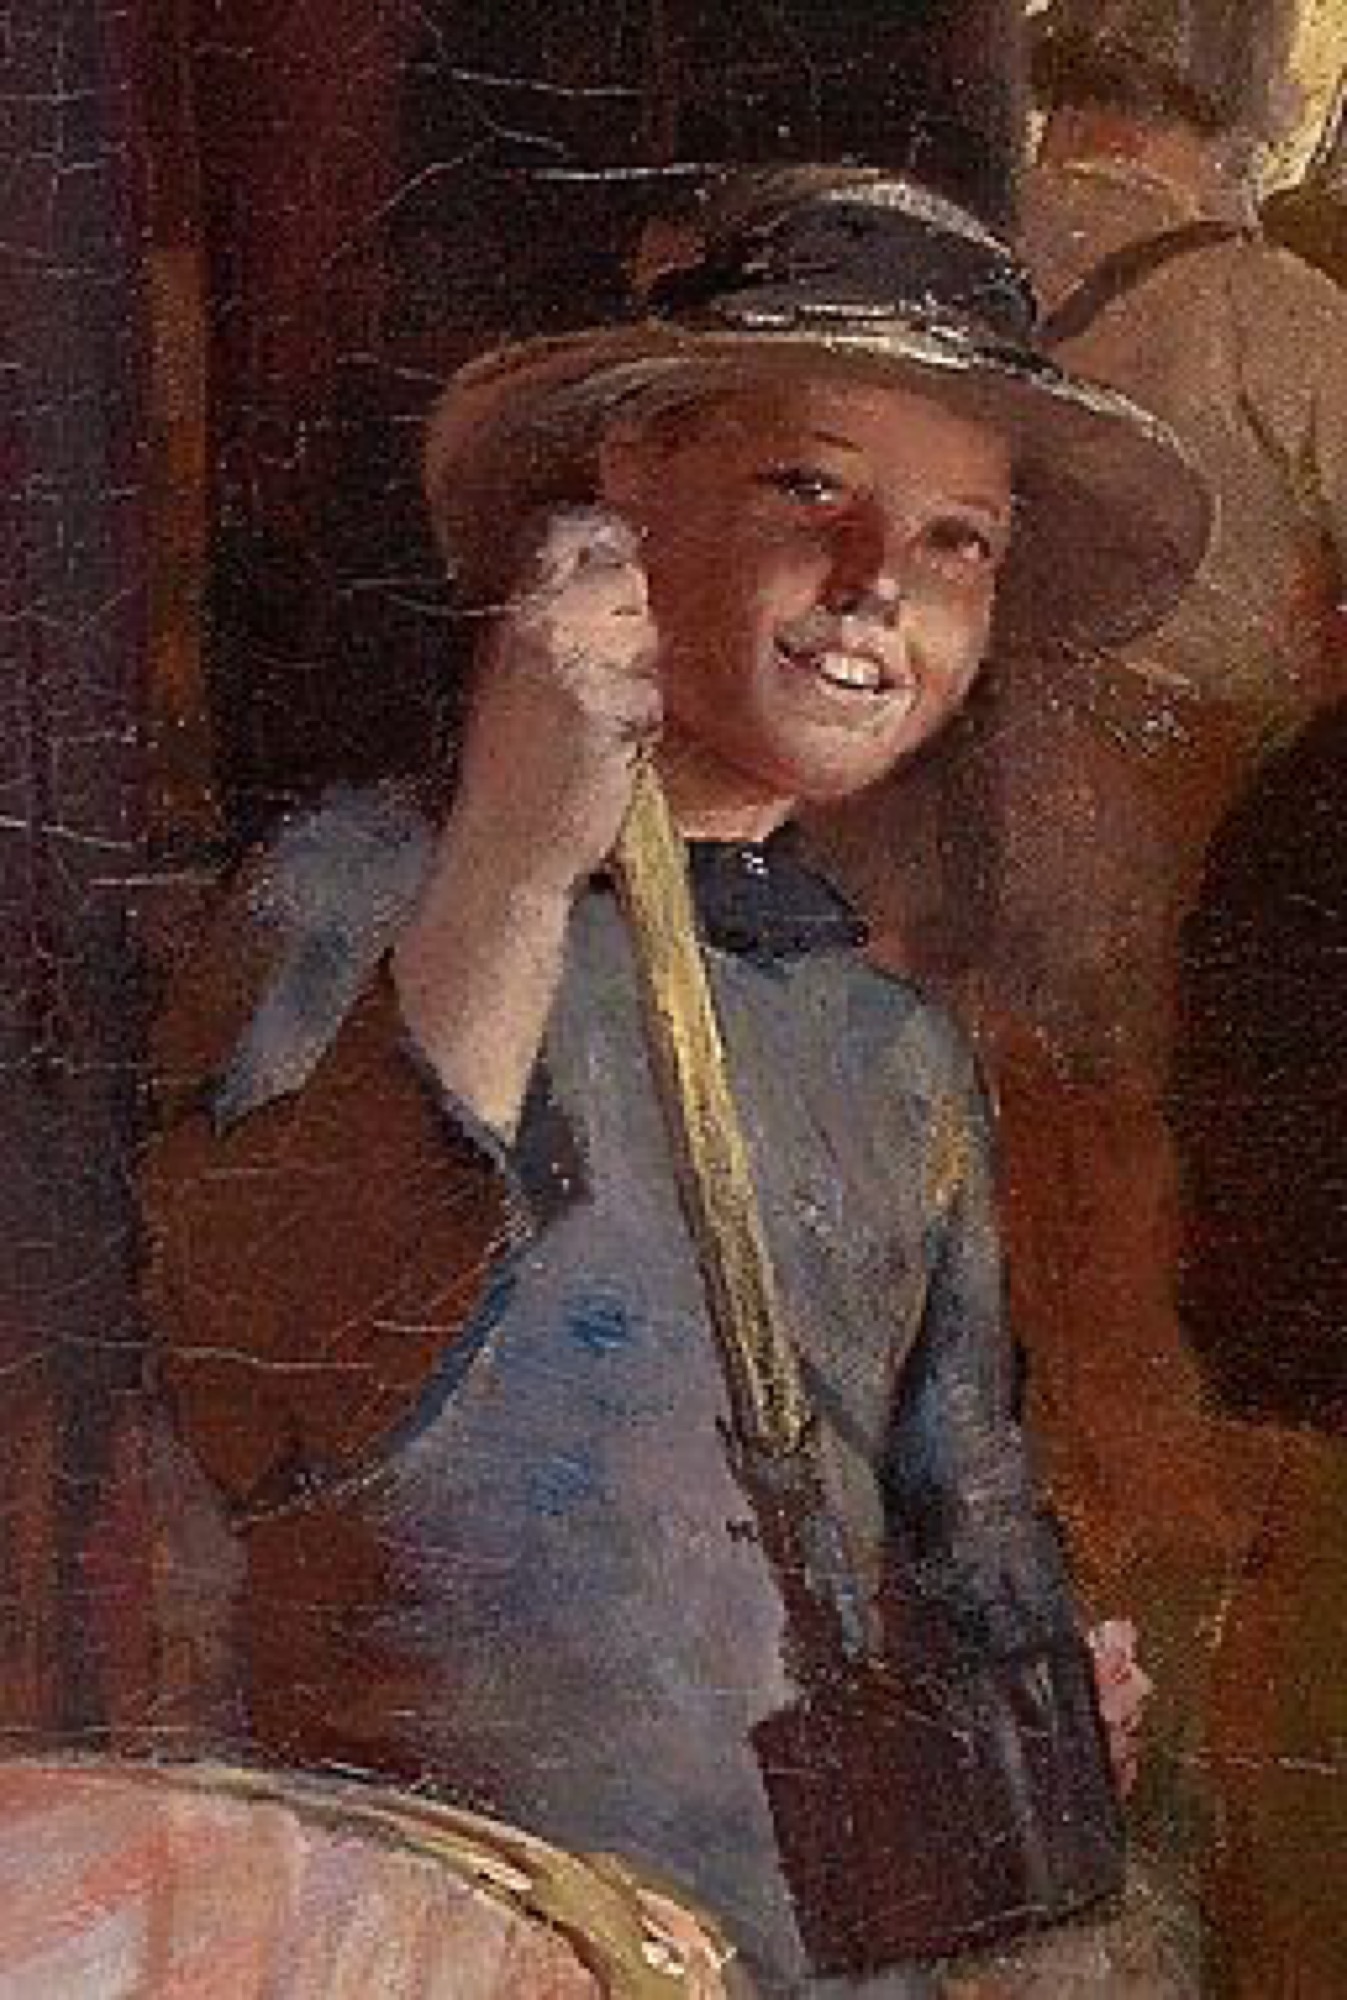 Tom Roberts, <em>Shearing the Rams</em> (Detail) (1888-90), oil on canvas, 119.4 x 180.3 cm, National Gallery of Victoria, Felton Bequest, 1932.